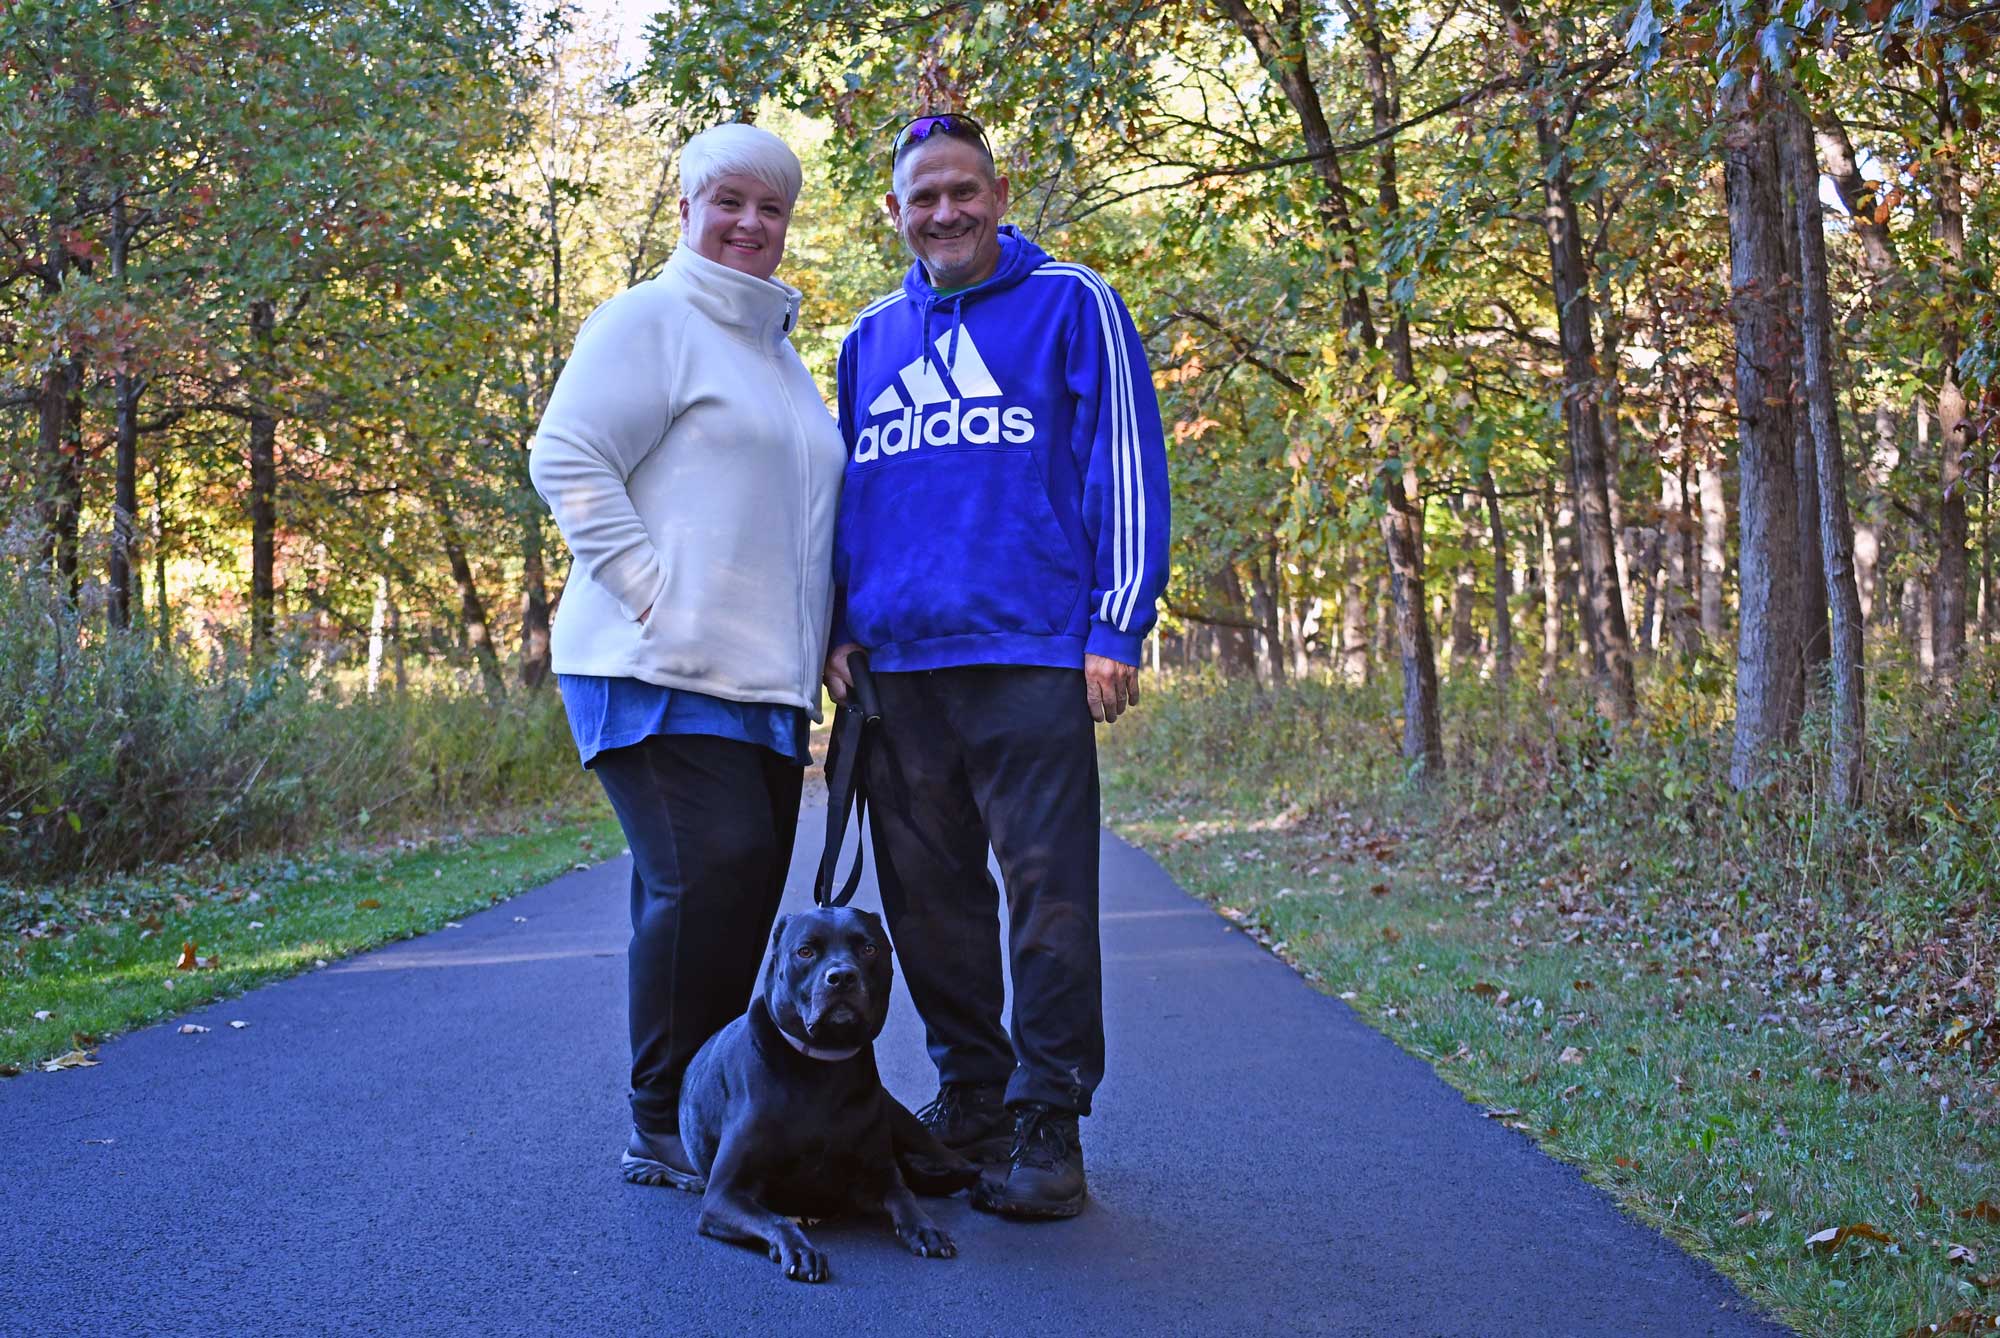 A man, woman, and their dog pose for a photo along a tree-lined trail.